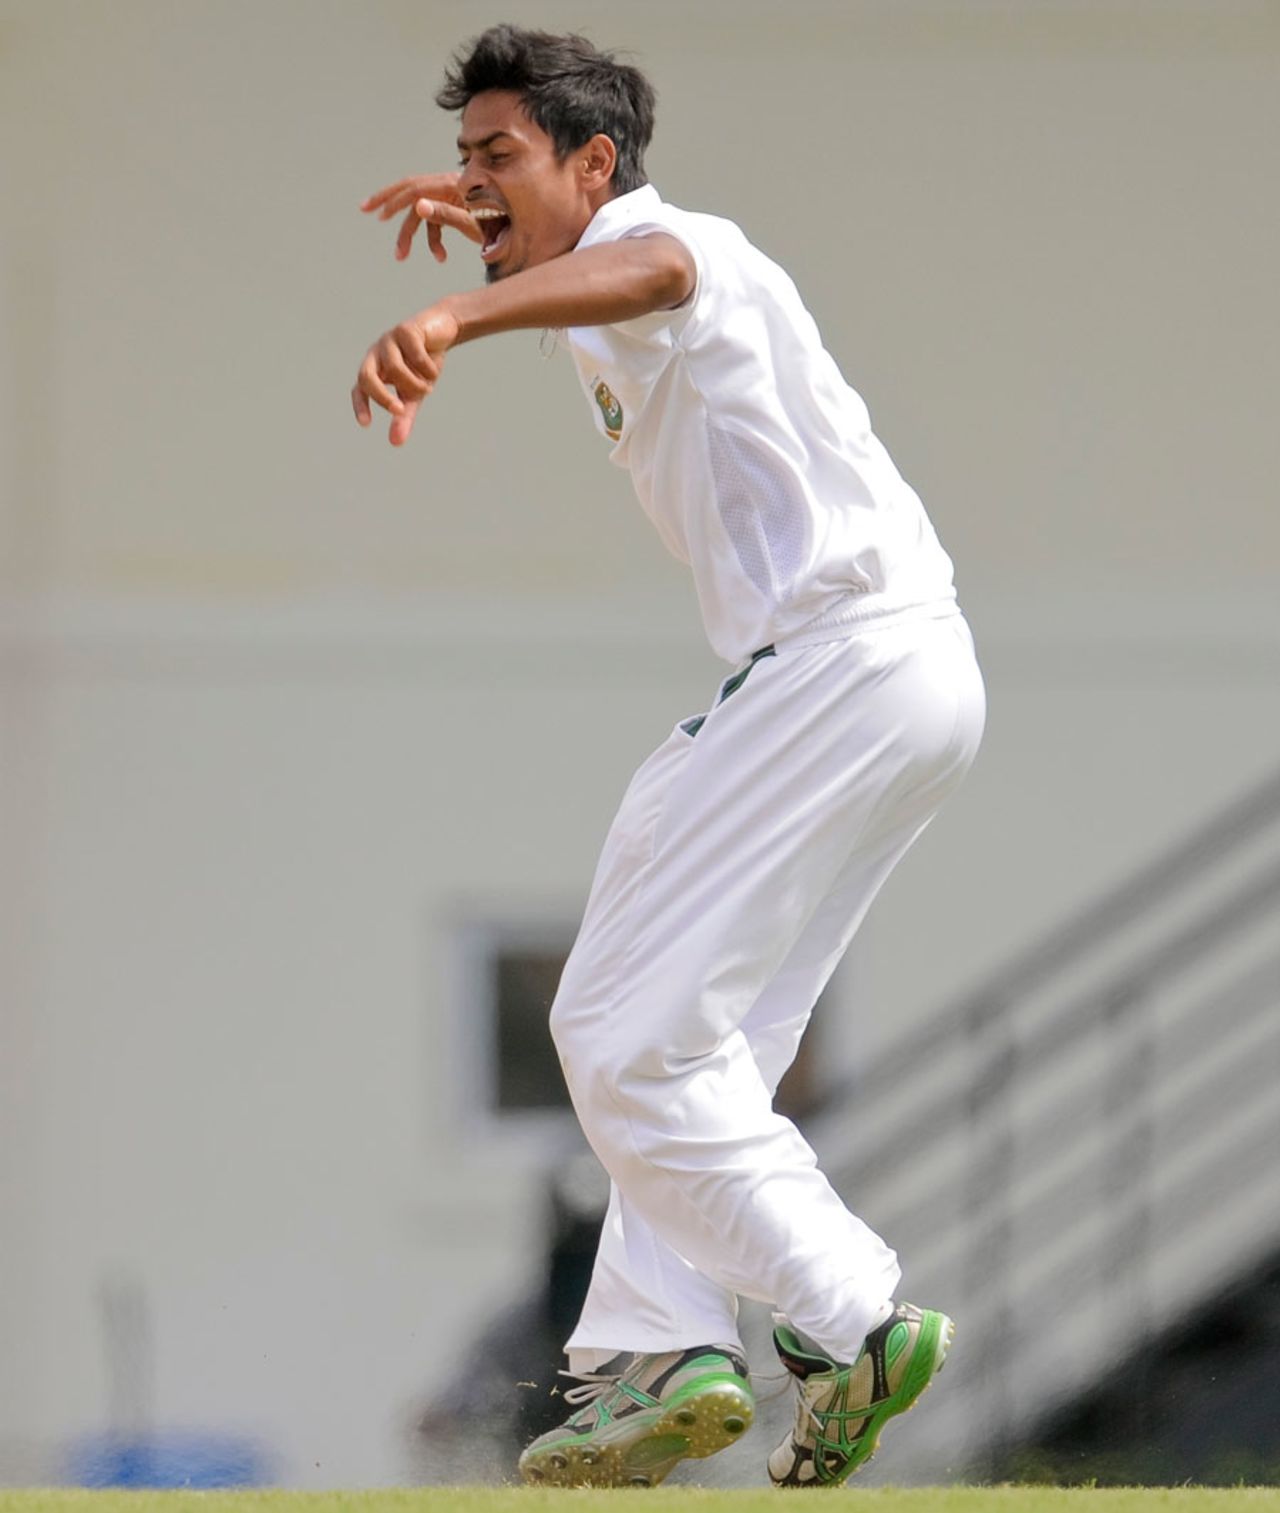 Taijul Islam celebrates a wicket, West Indies v Bangladesh, 2nd Test, St. Lucia, 1st day, September 13, 2014